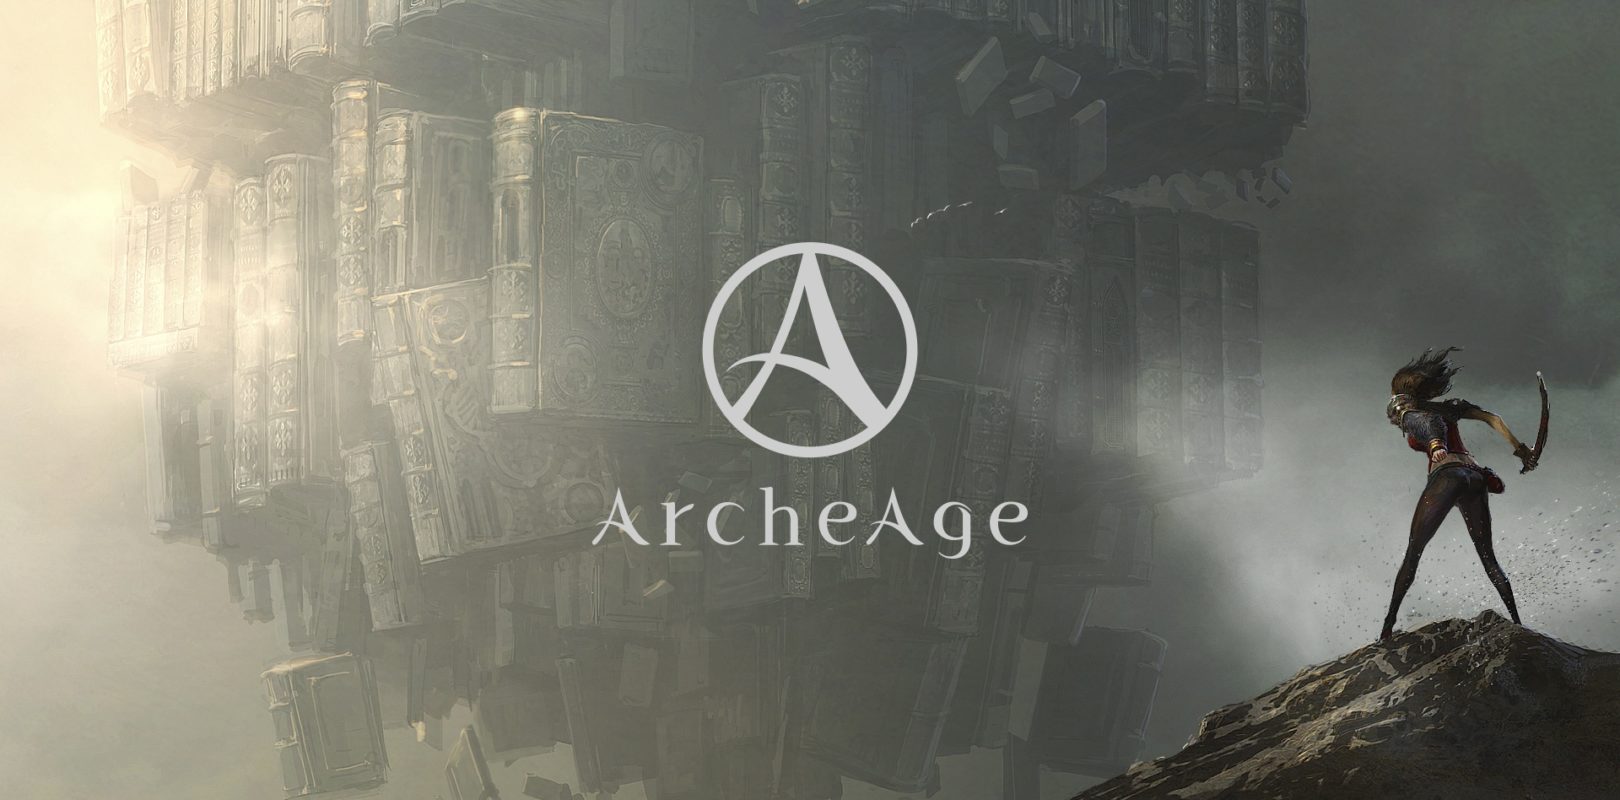 download kakao games archeage unchained